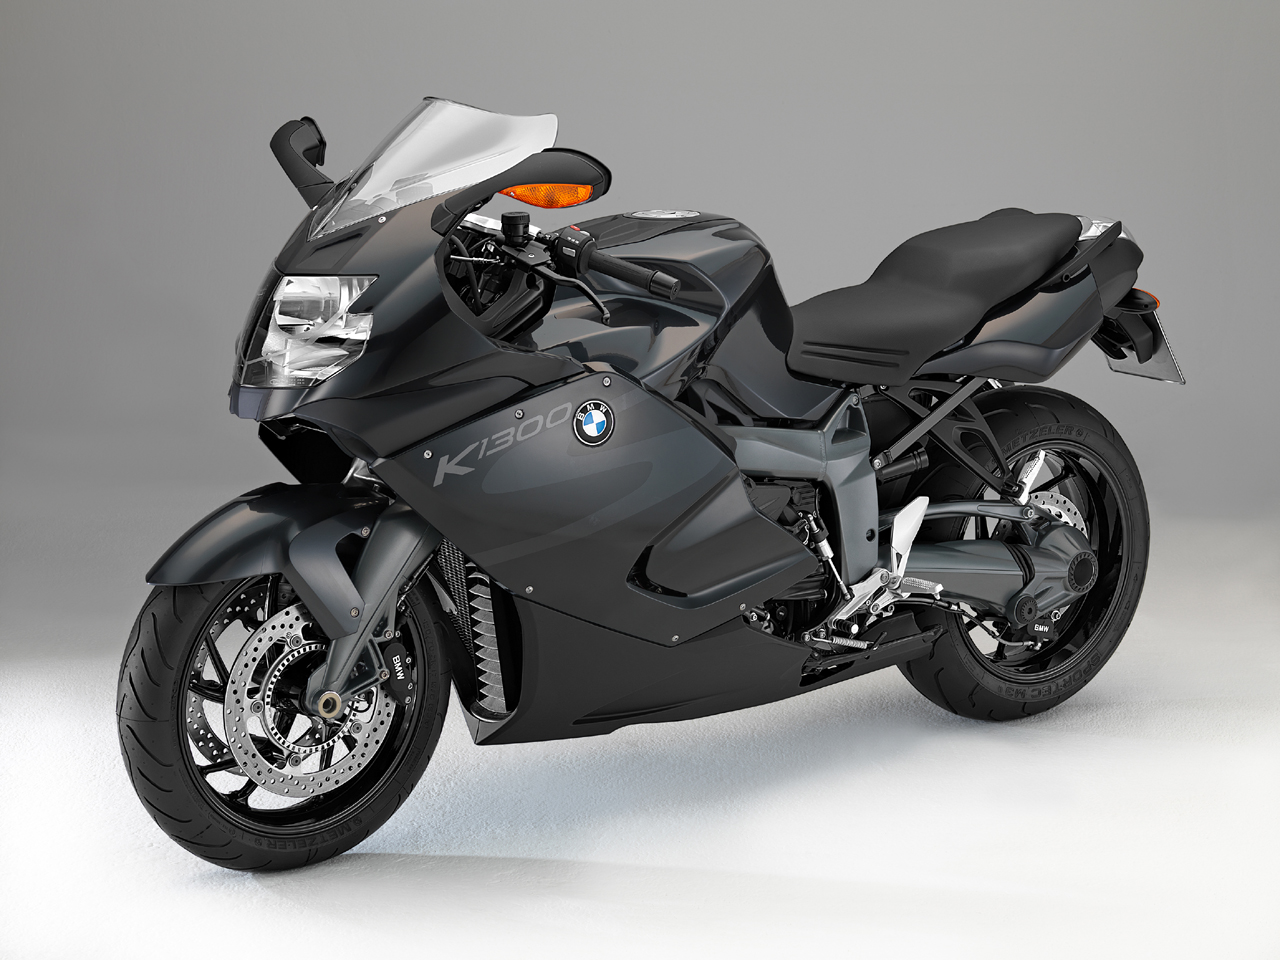 ABS will come as standard on all BMW bikes